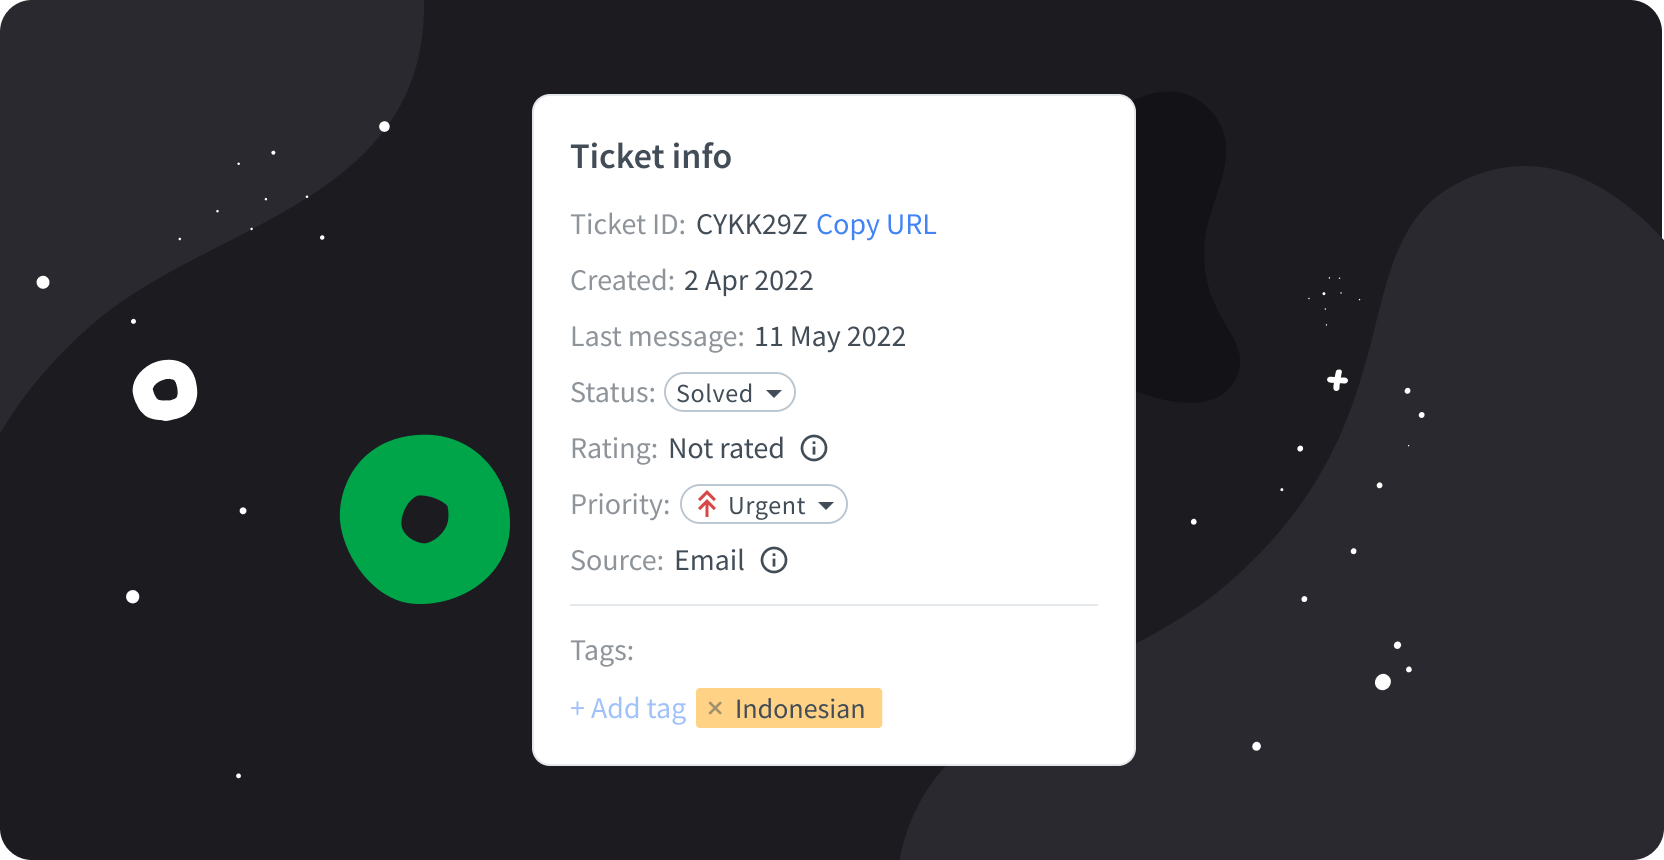 Customer ticket with custom tags created by the Brastel team.